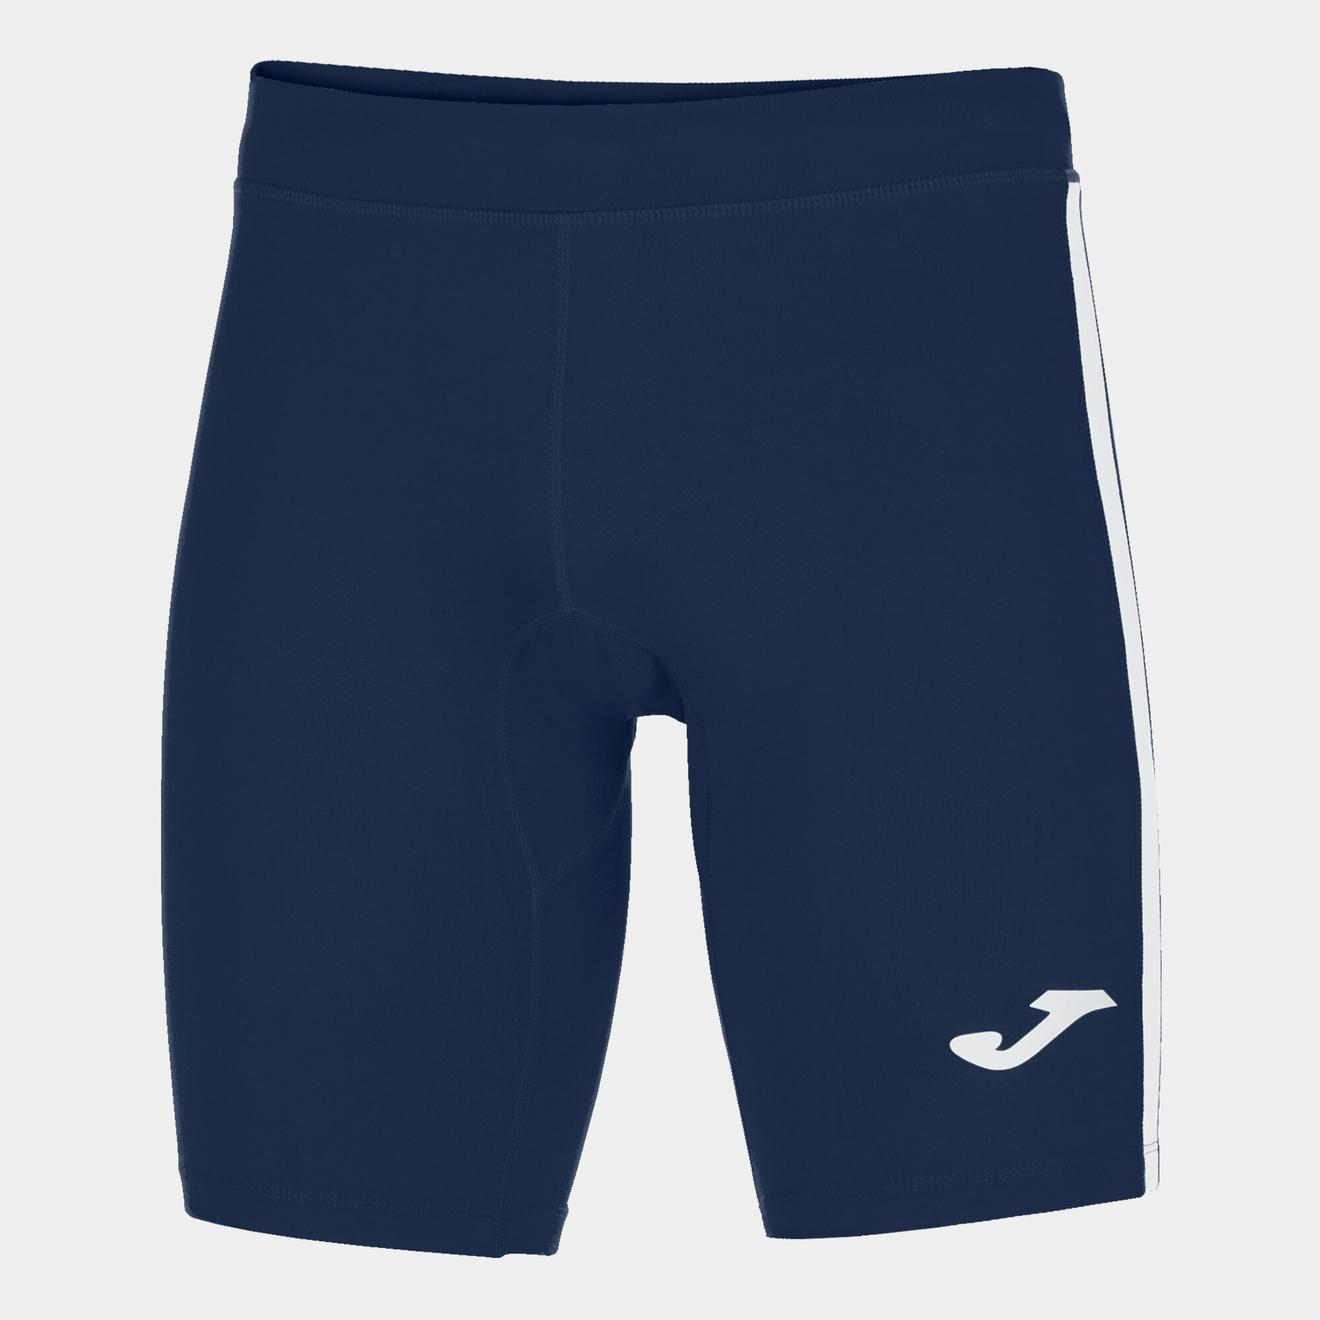 Short tights man Elite VII navy blue white offers at £12.5 in Joma